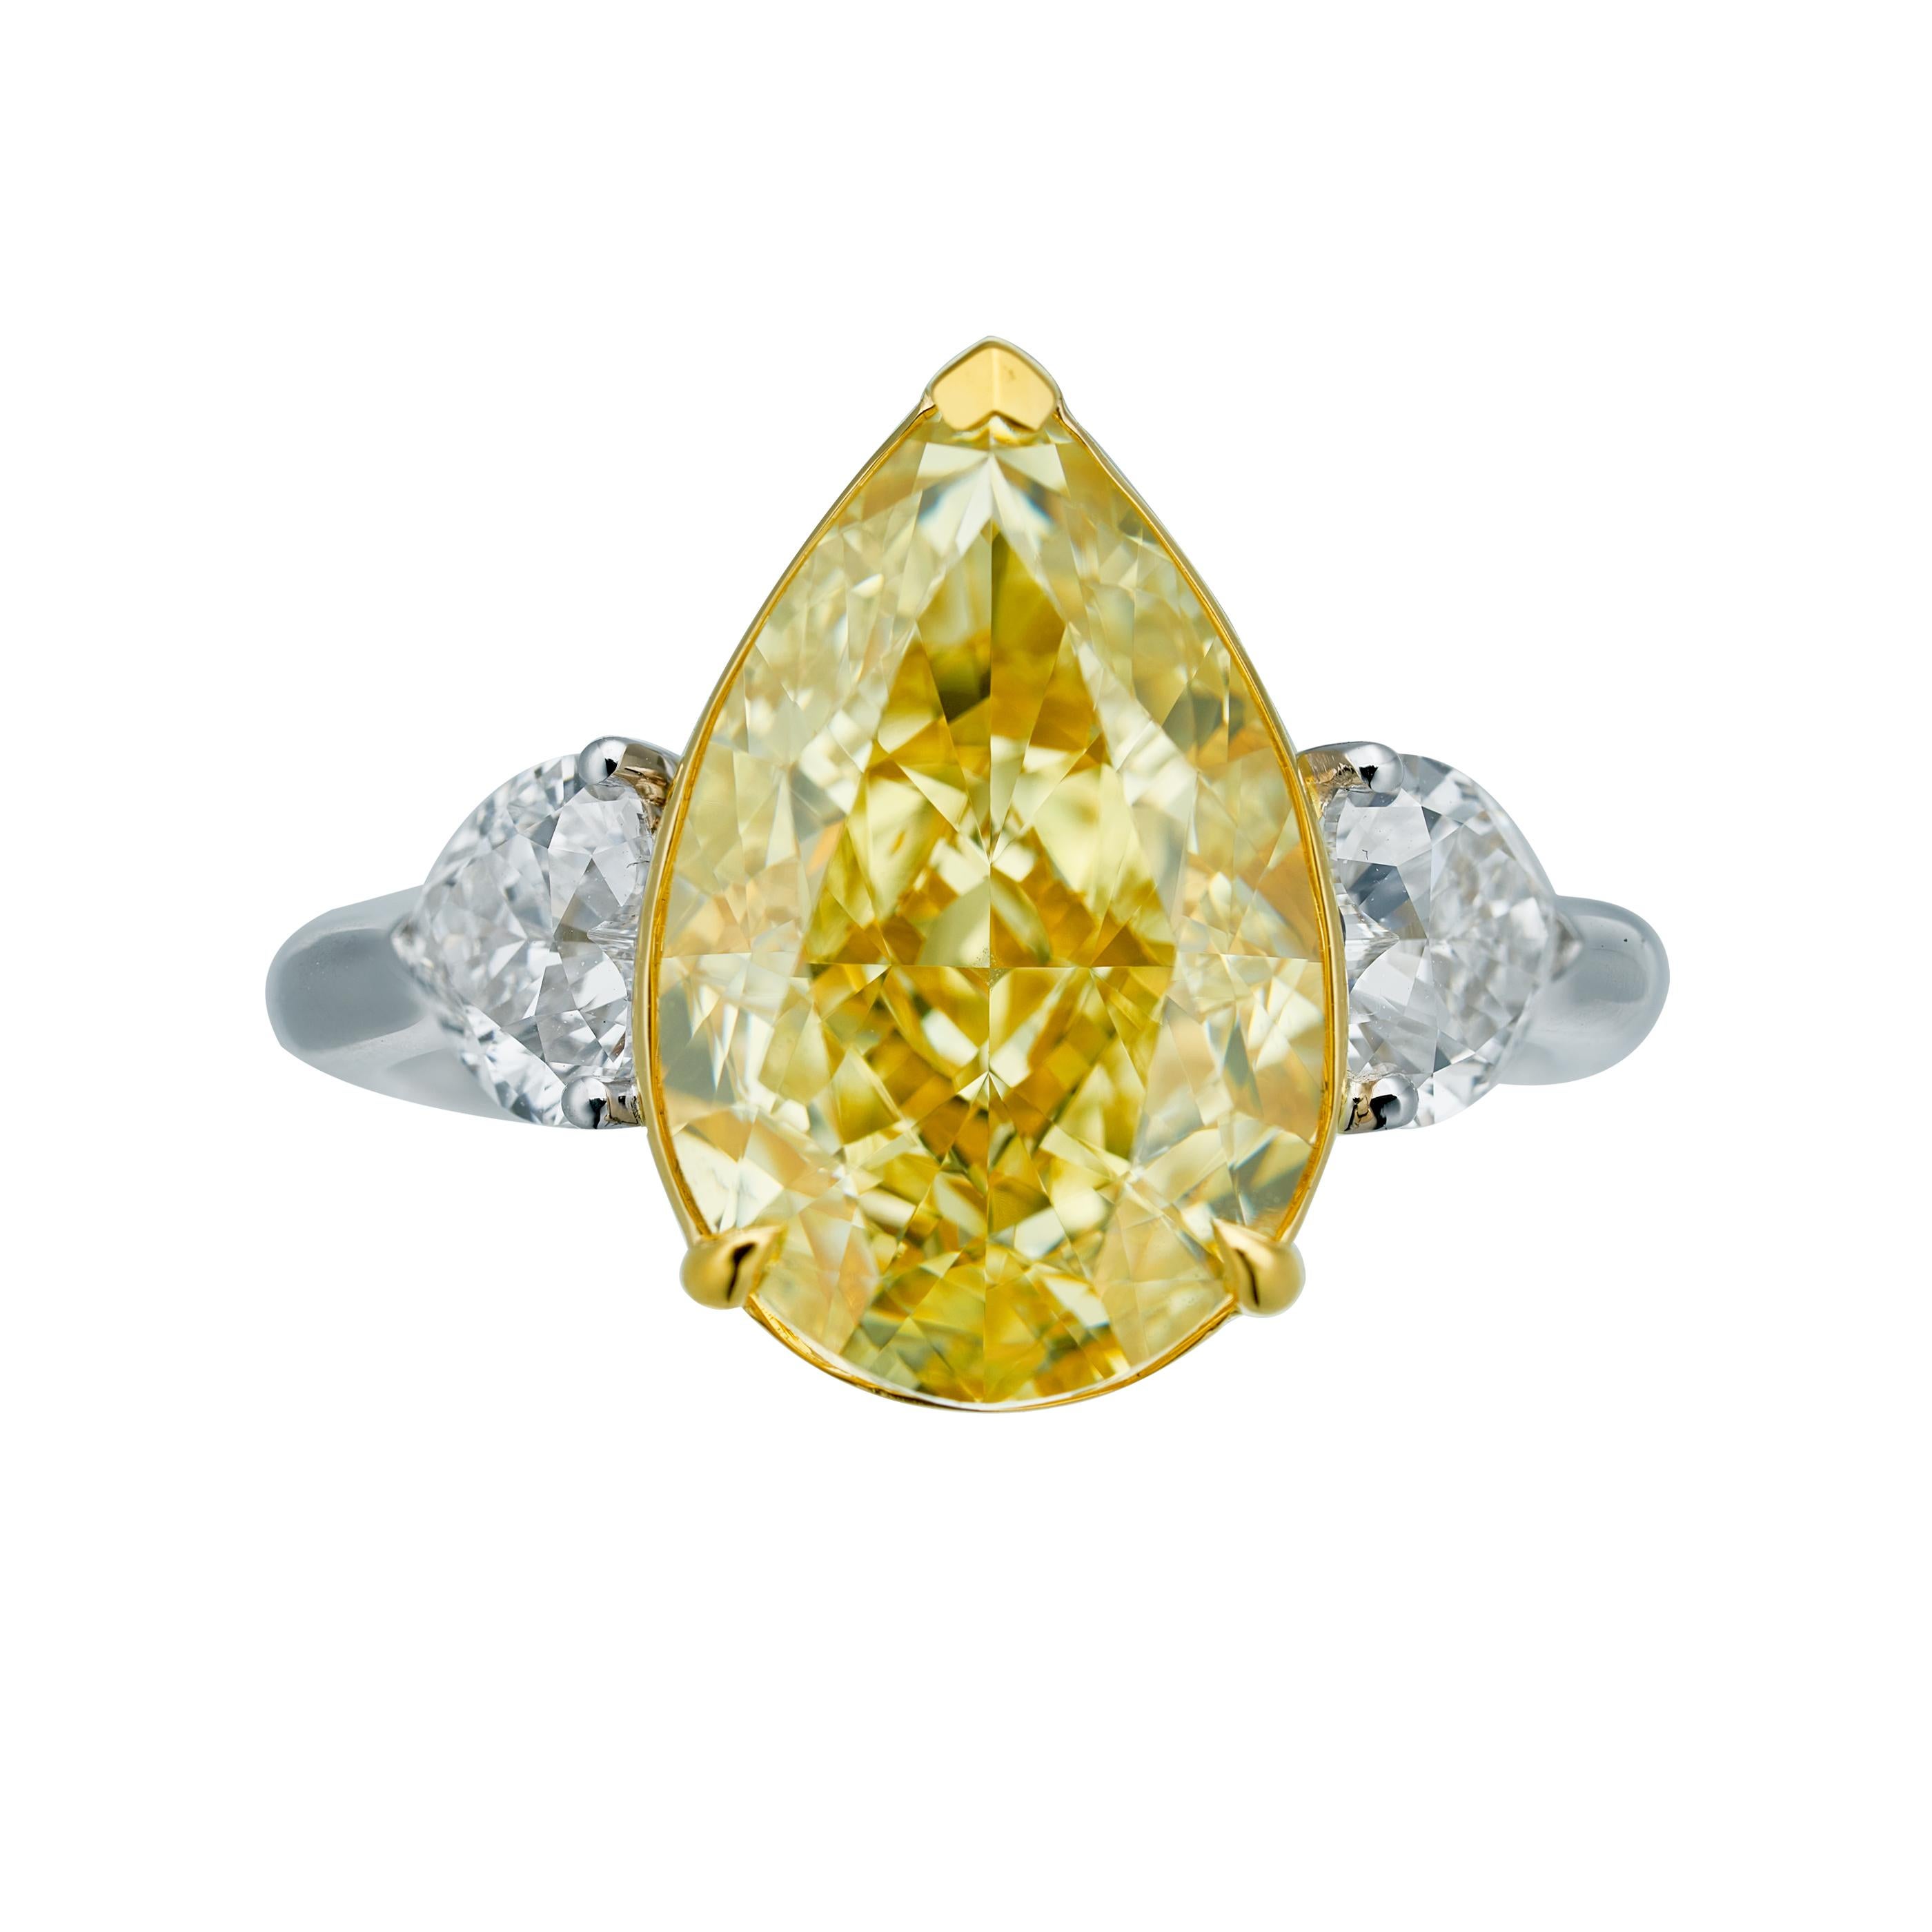 7.02ct Natural Fancy Yellow GIA Certified Pear Shape Diamond Ring, a radiant masterpiece destined to captivate hearts and illuminate any occasion. This extraordinary ring is crafted in lustrous 18kt gold, showcasing a centerpiece of remarkable